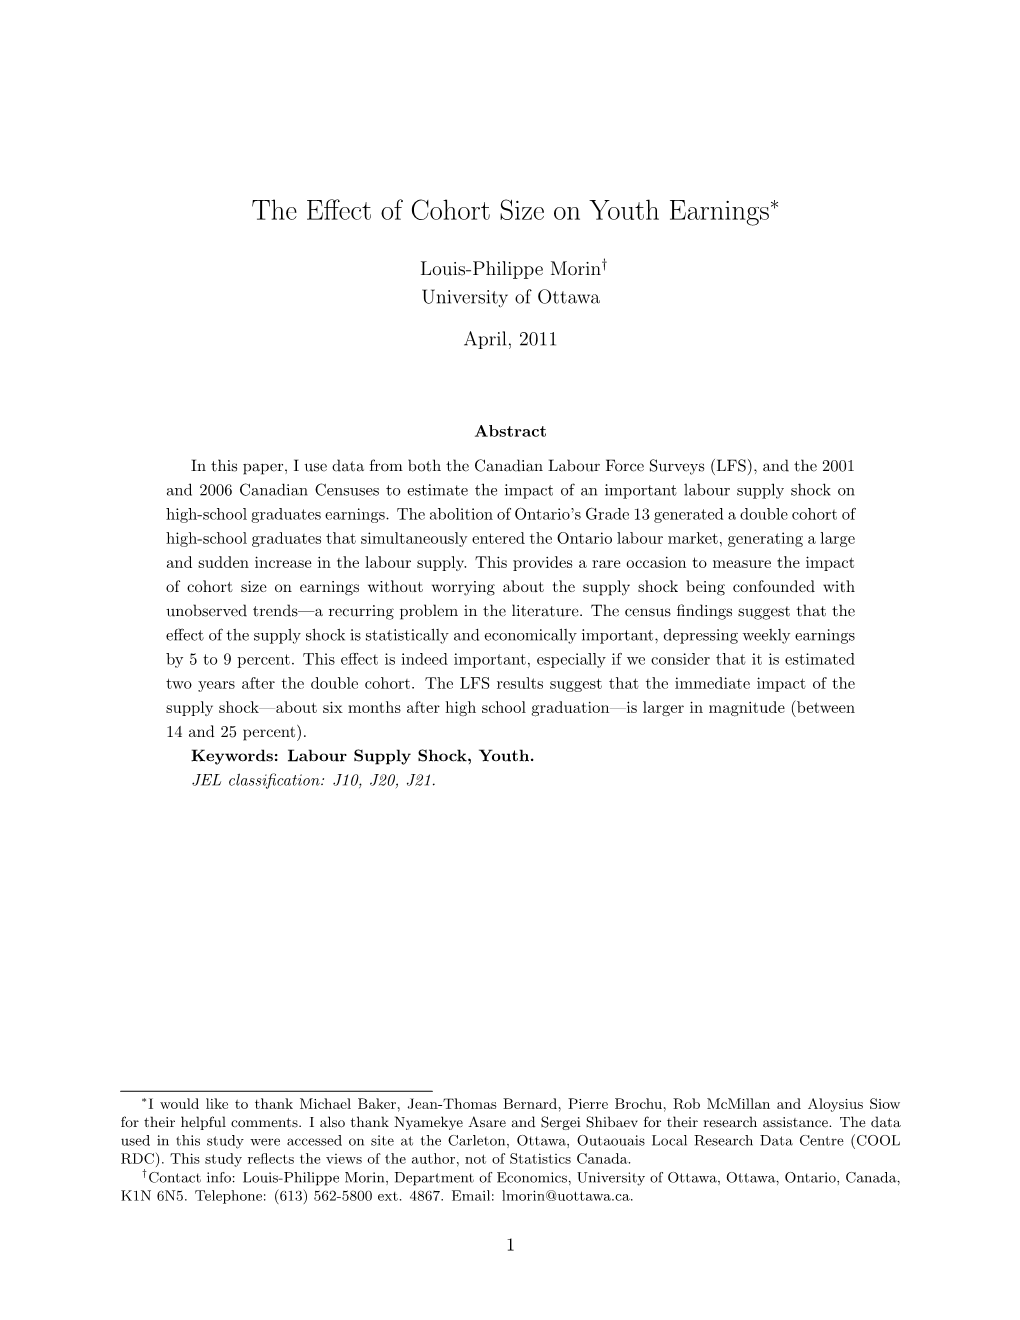 The Effect of Cohort Size on Youth Earnings